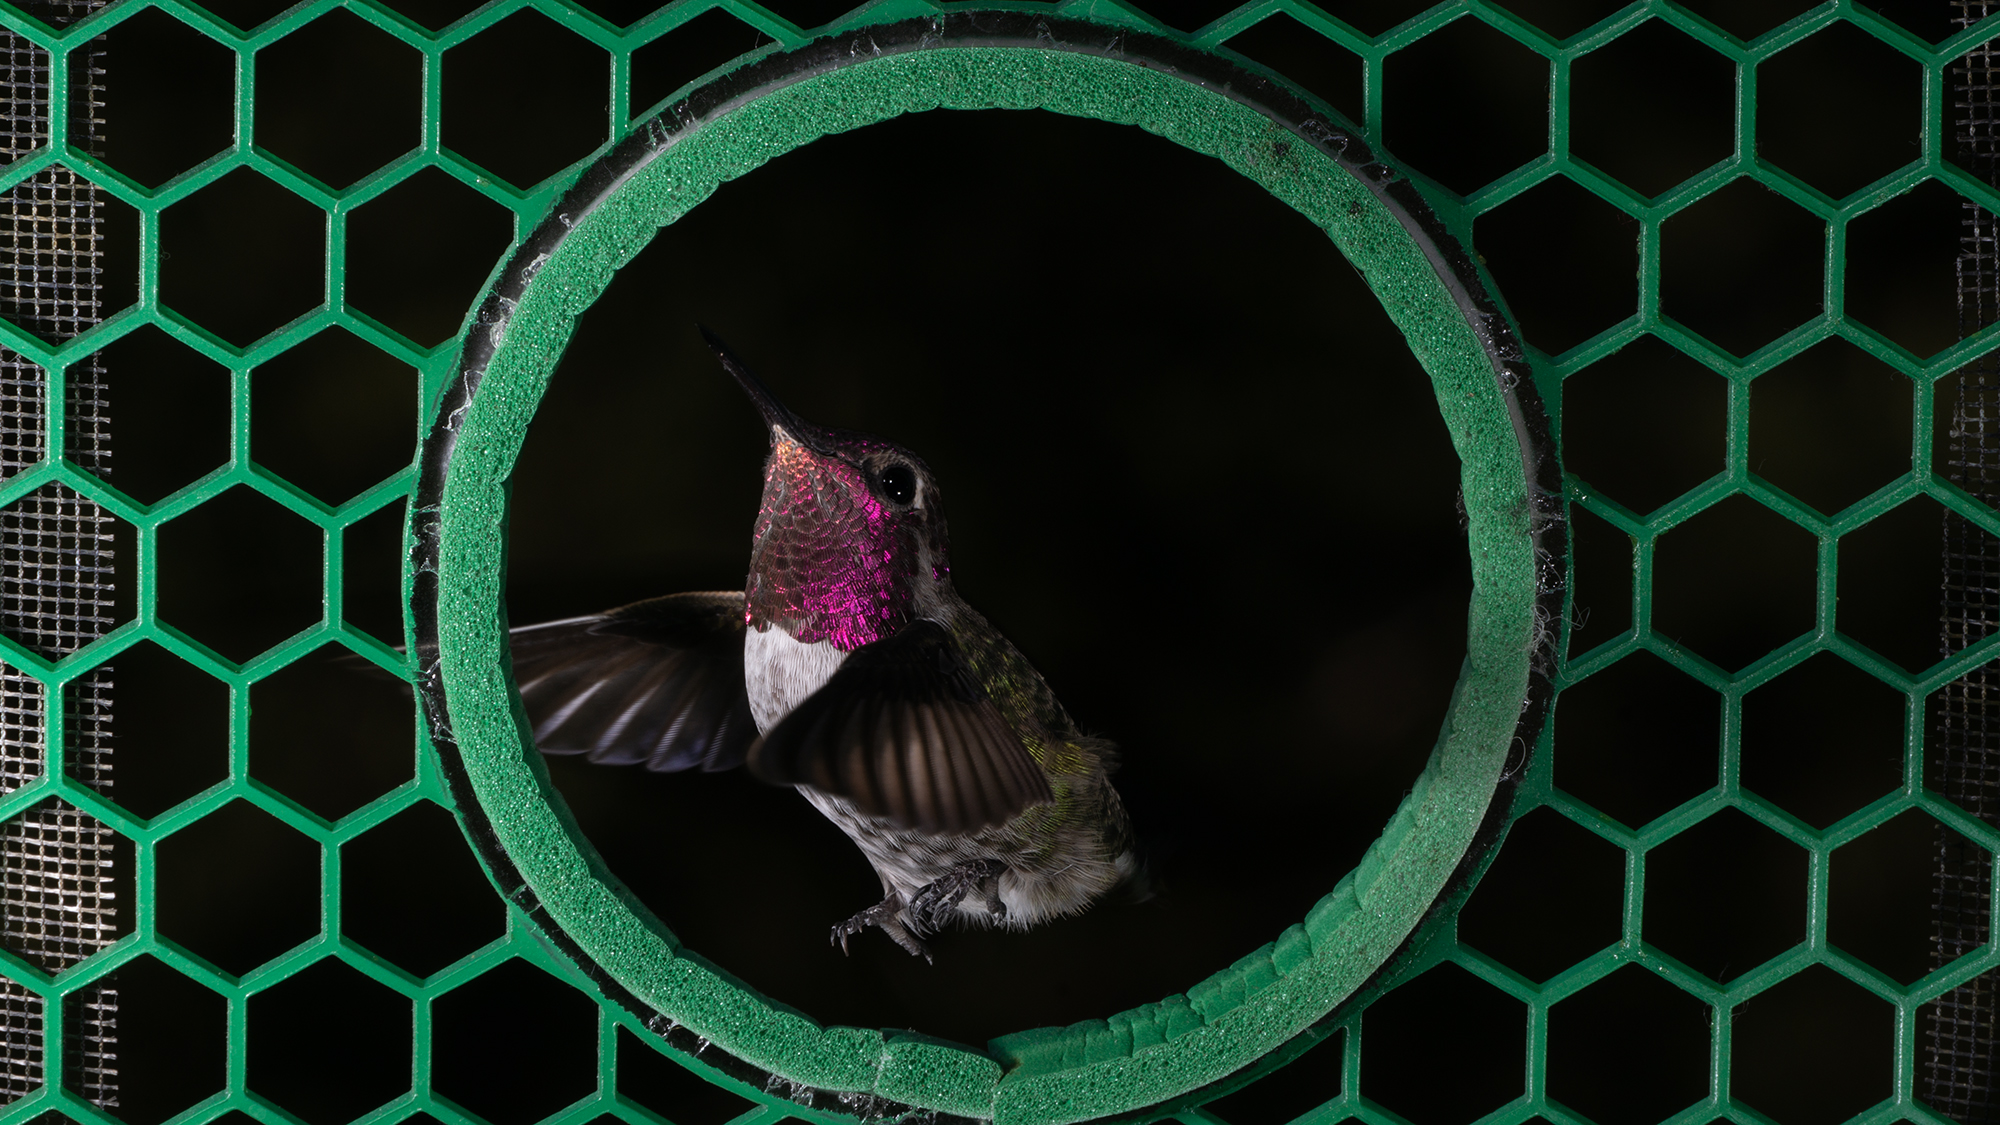 red throated hummingbird framed by round green aperture in screen